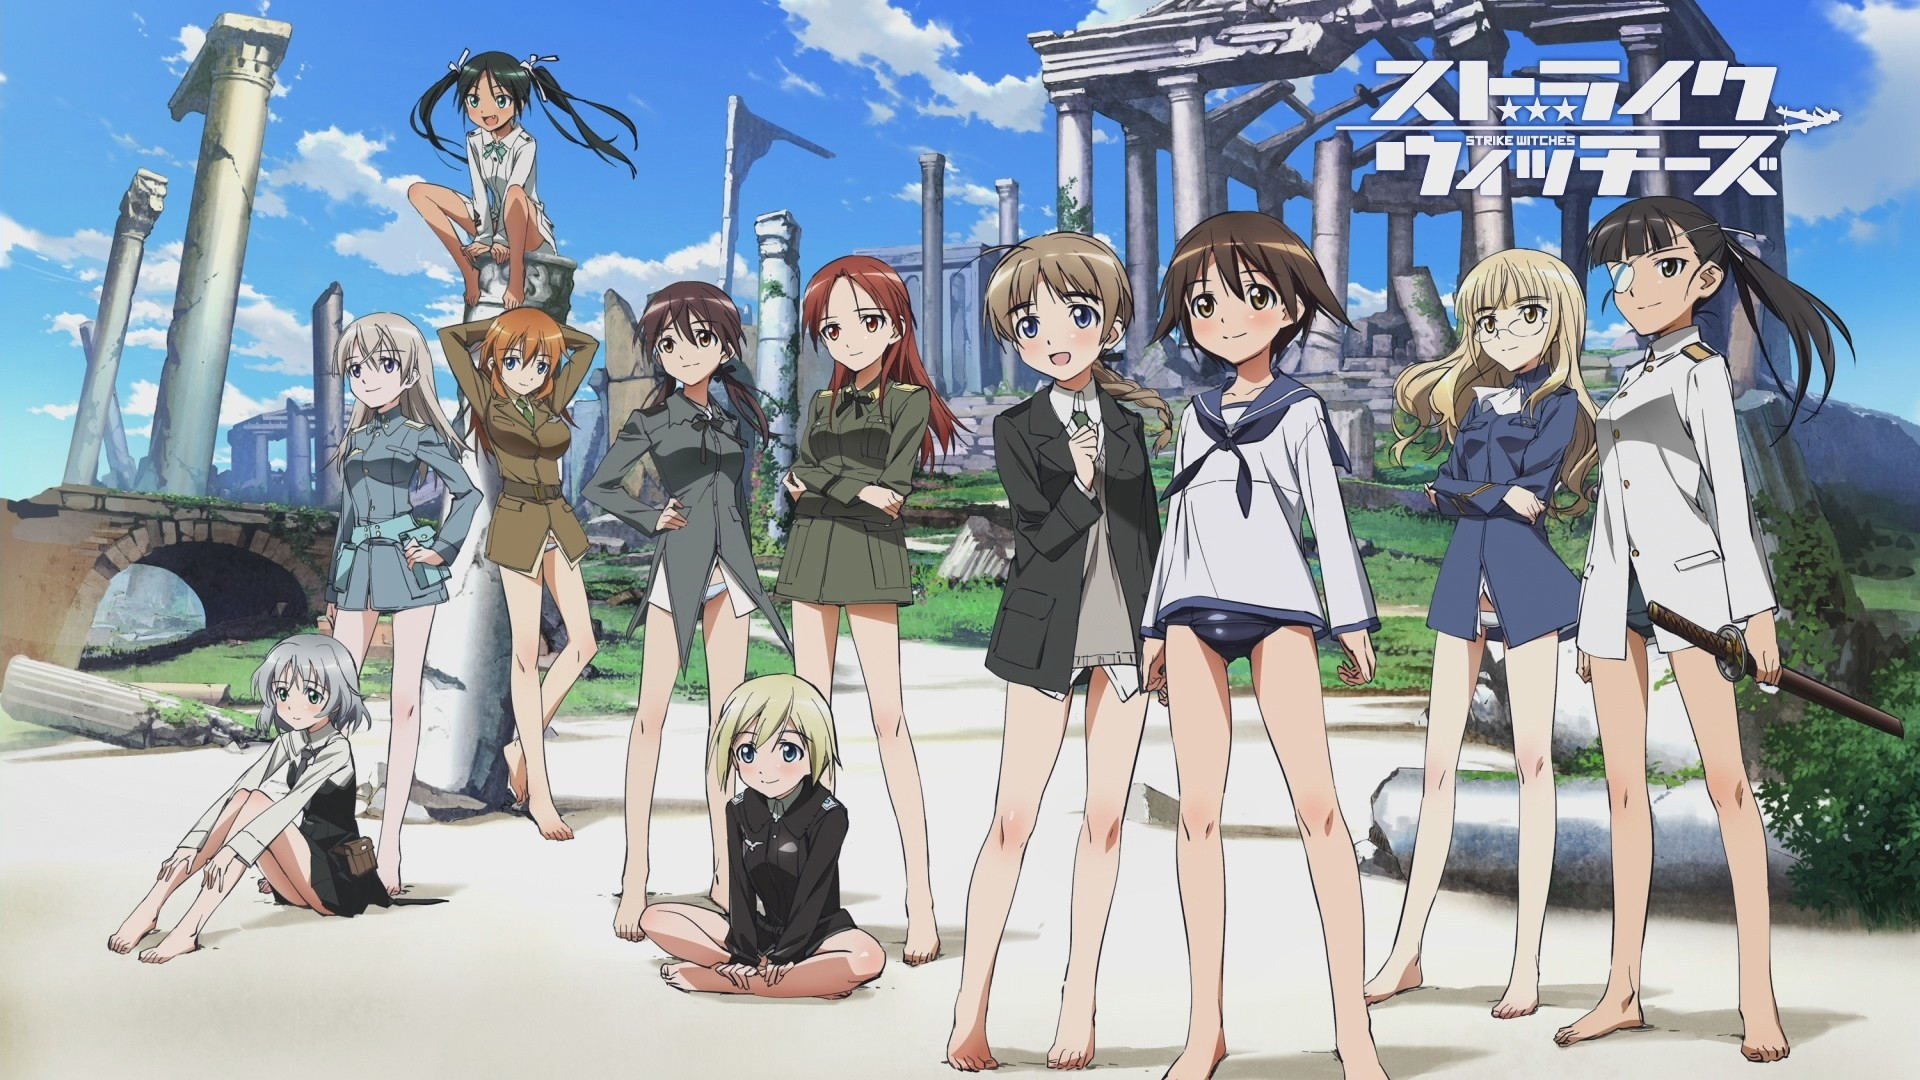 1920x1080 Strike Witches HD Wallpaper